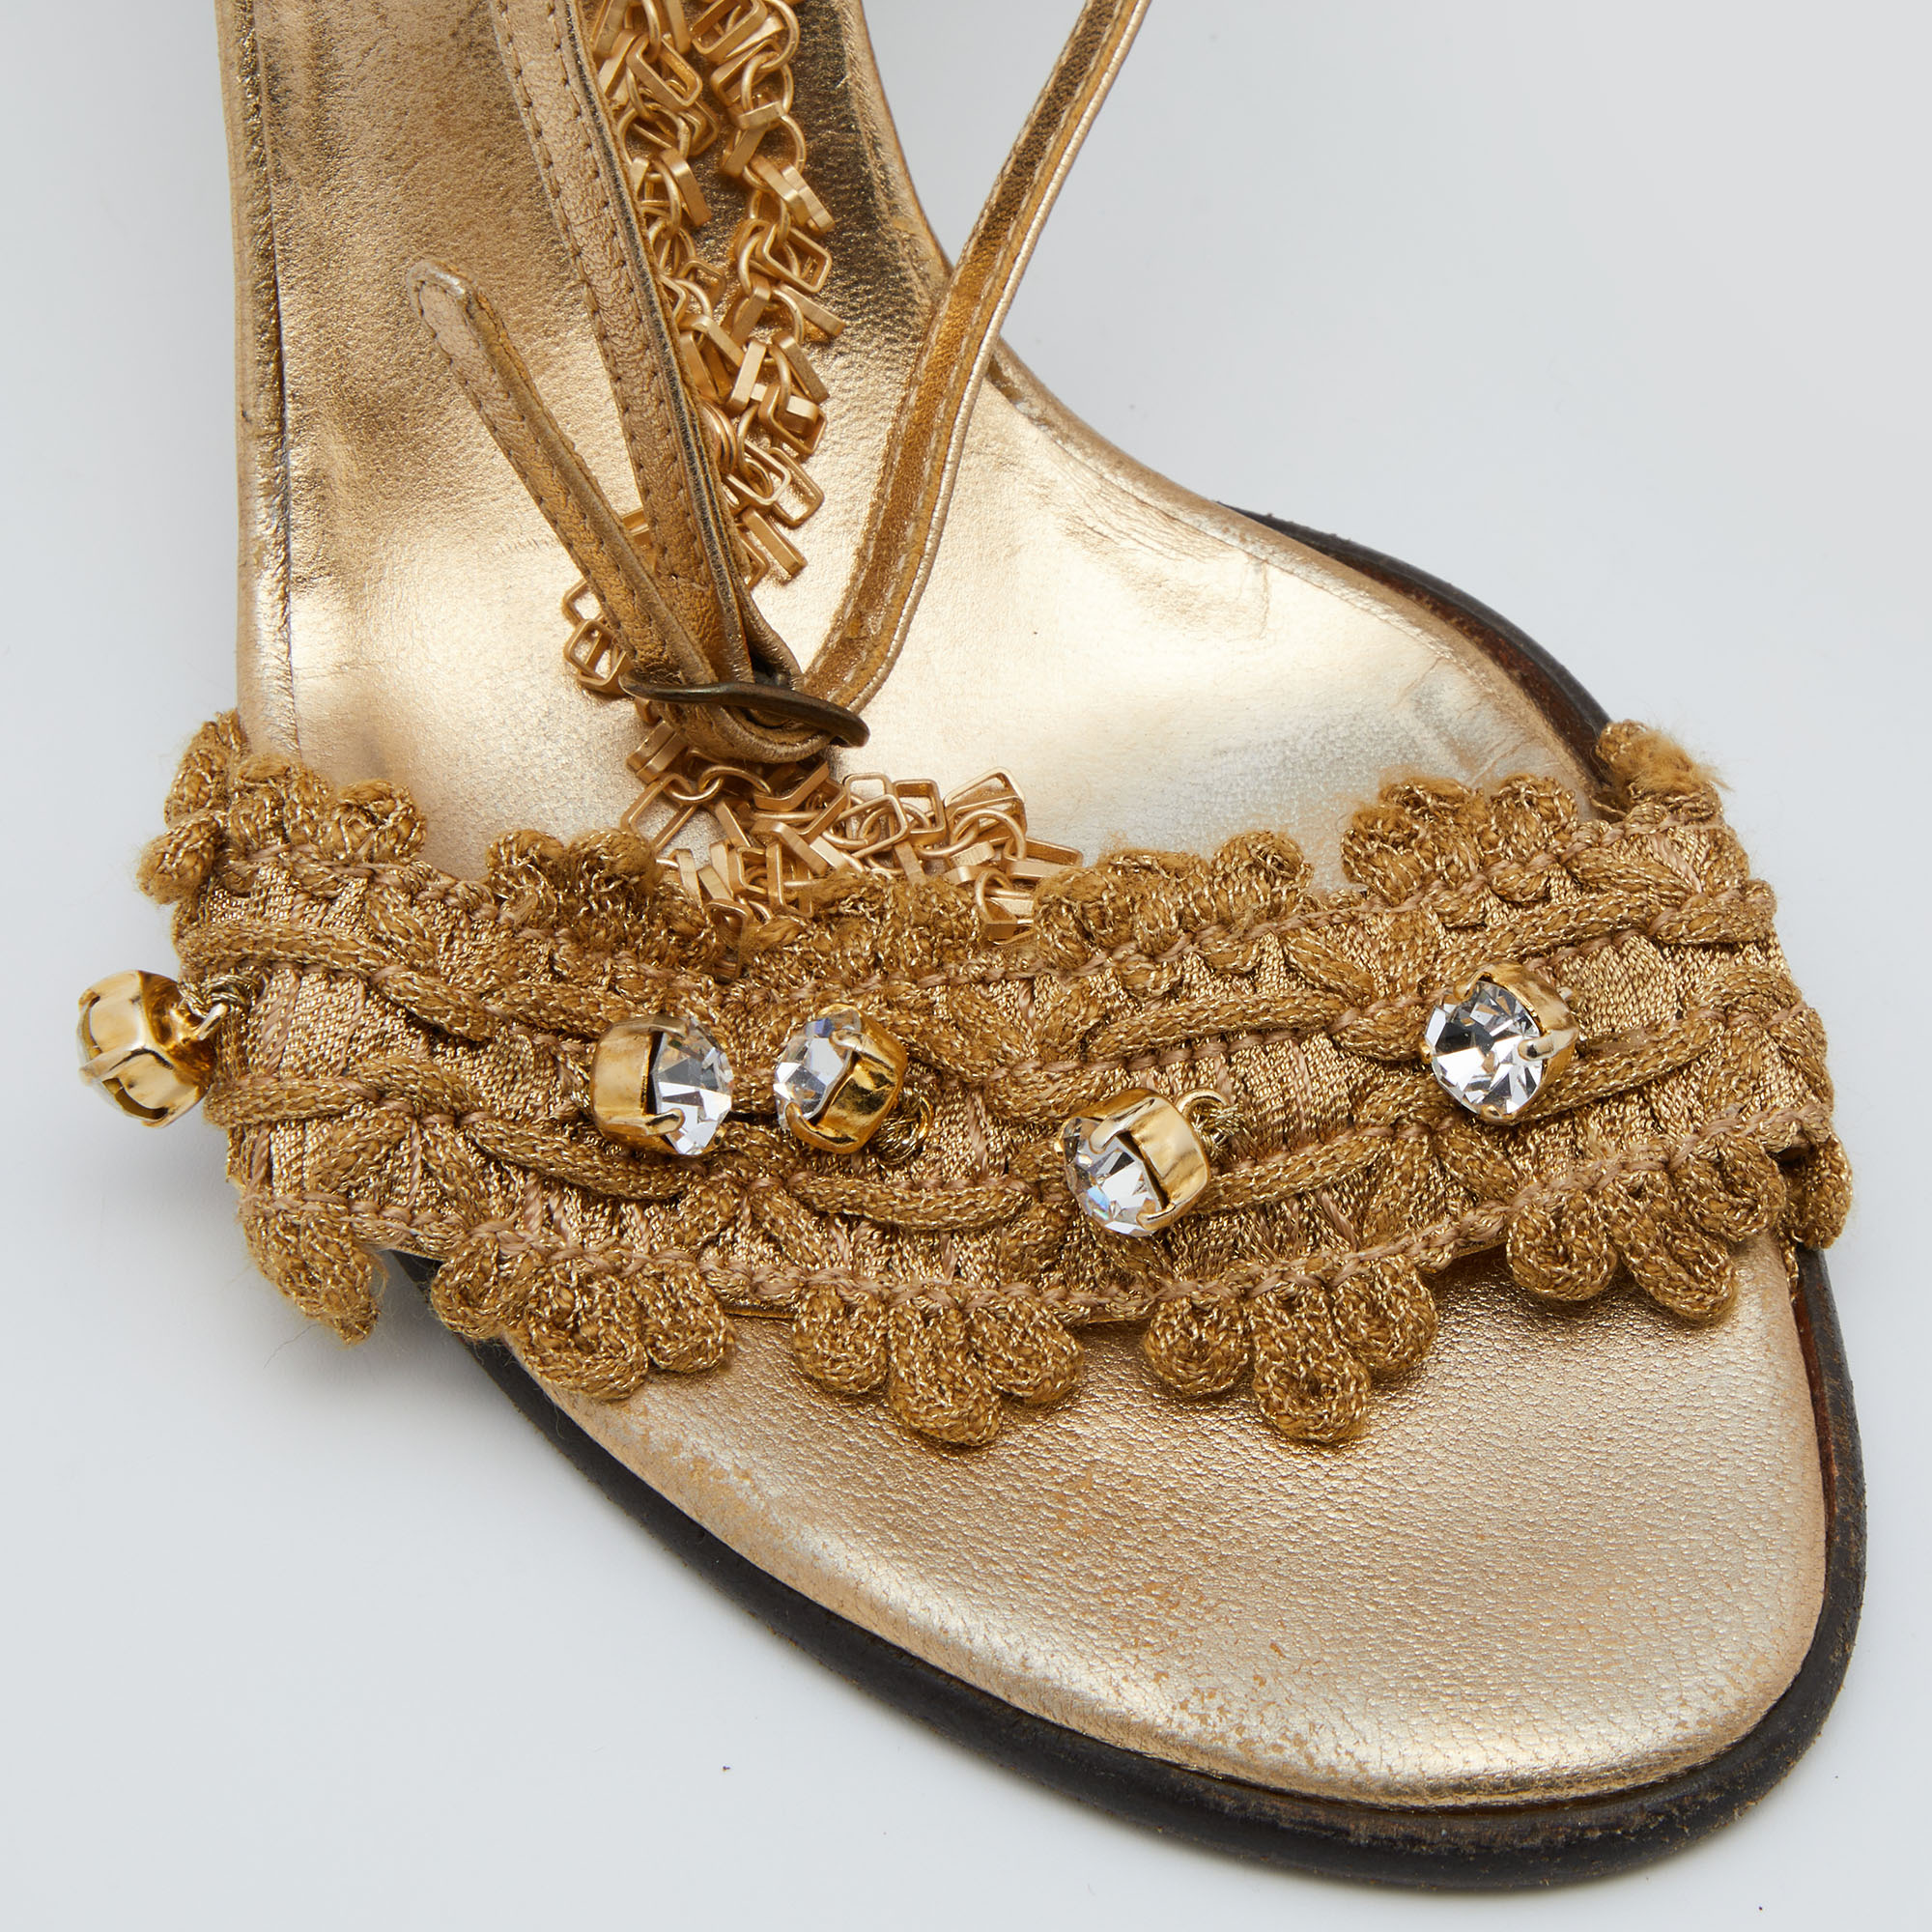 Dolce & Gabbana Gold Lurex Fabric And Leather Embellished Chain Detail Block Heel Sandal Size 35.5